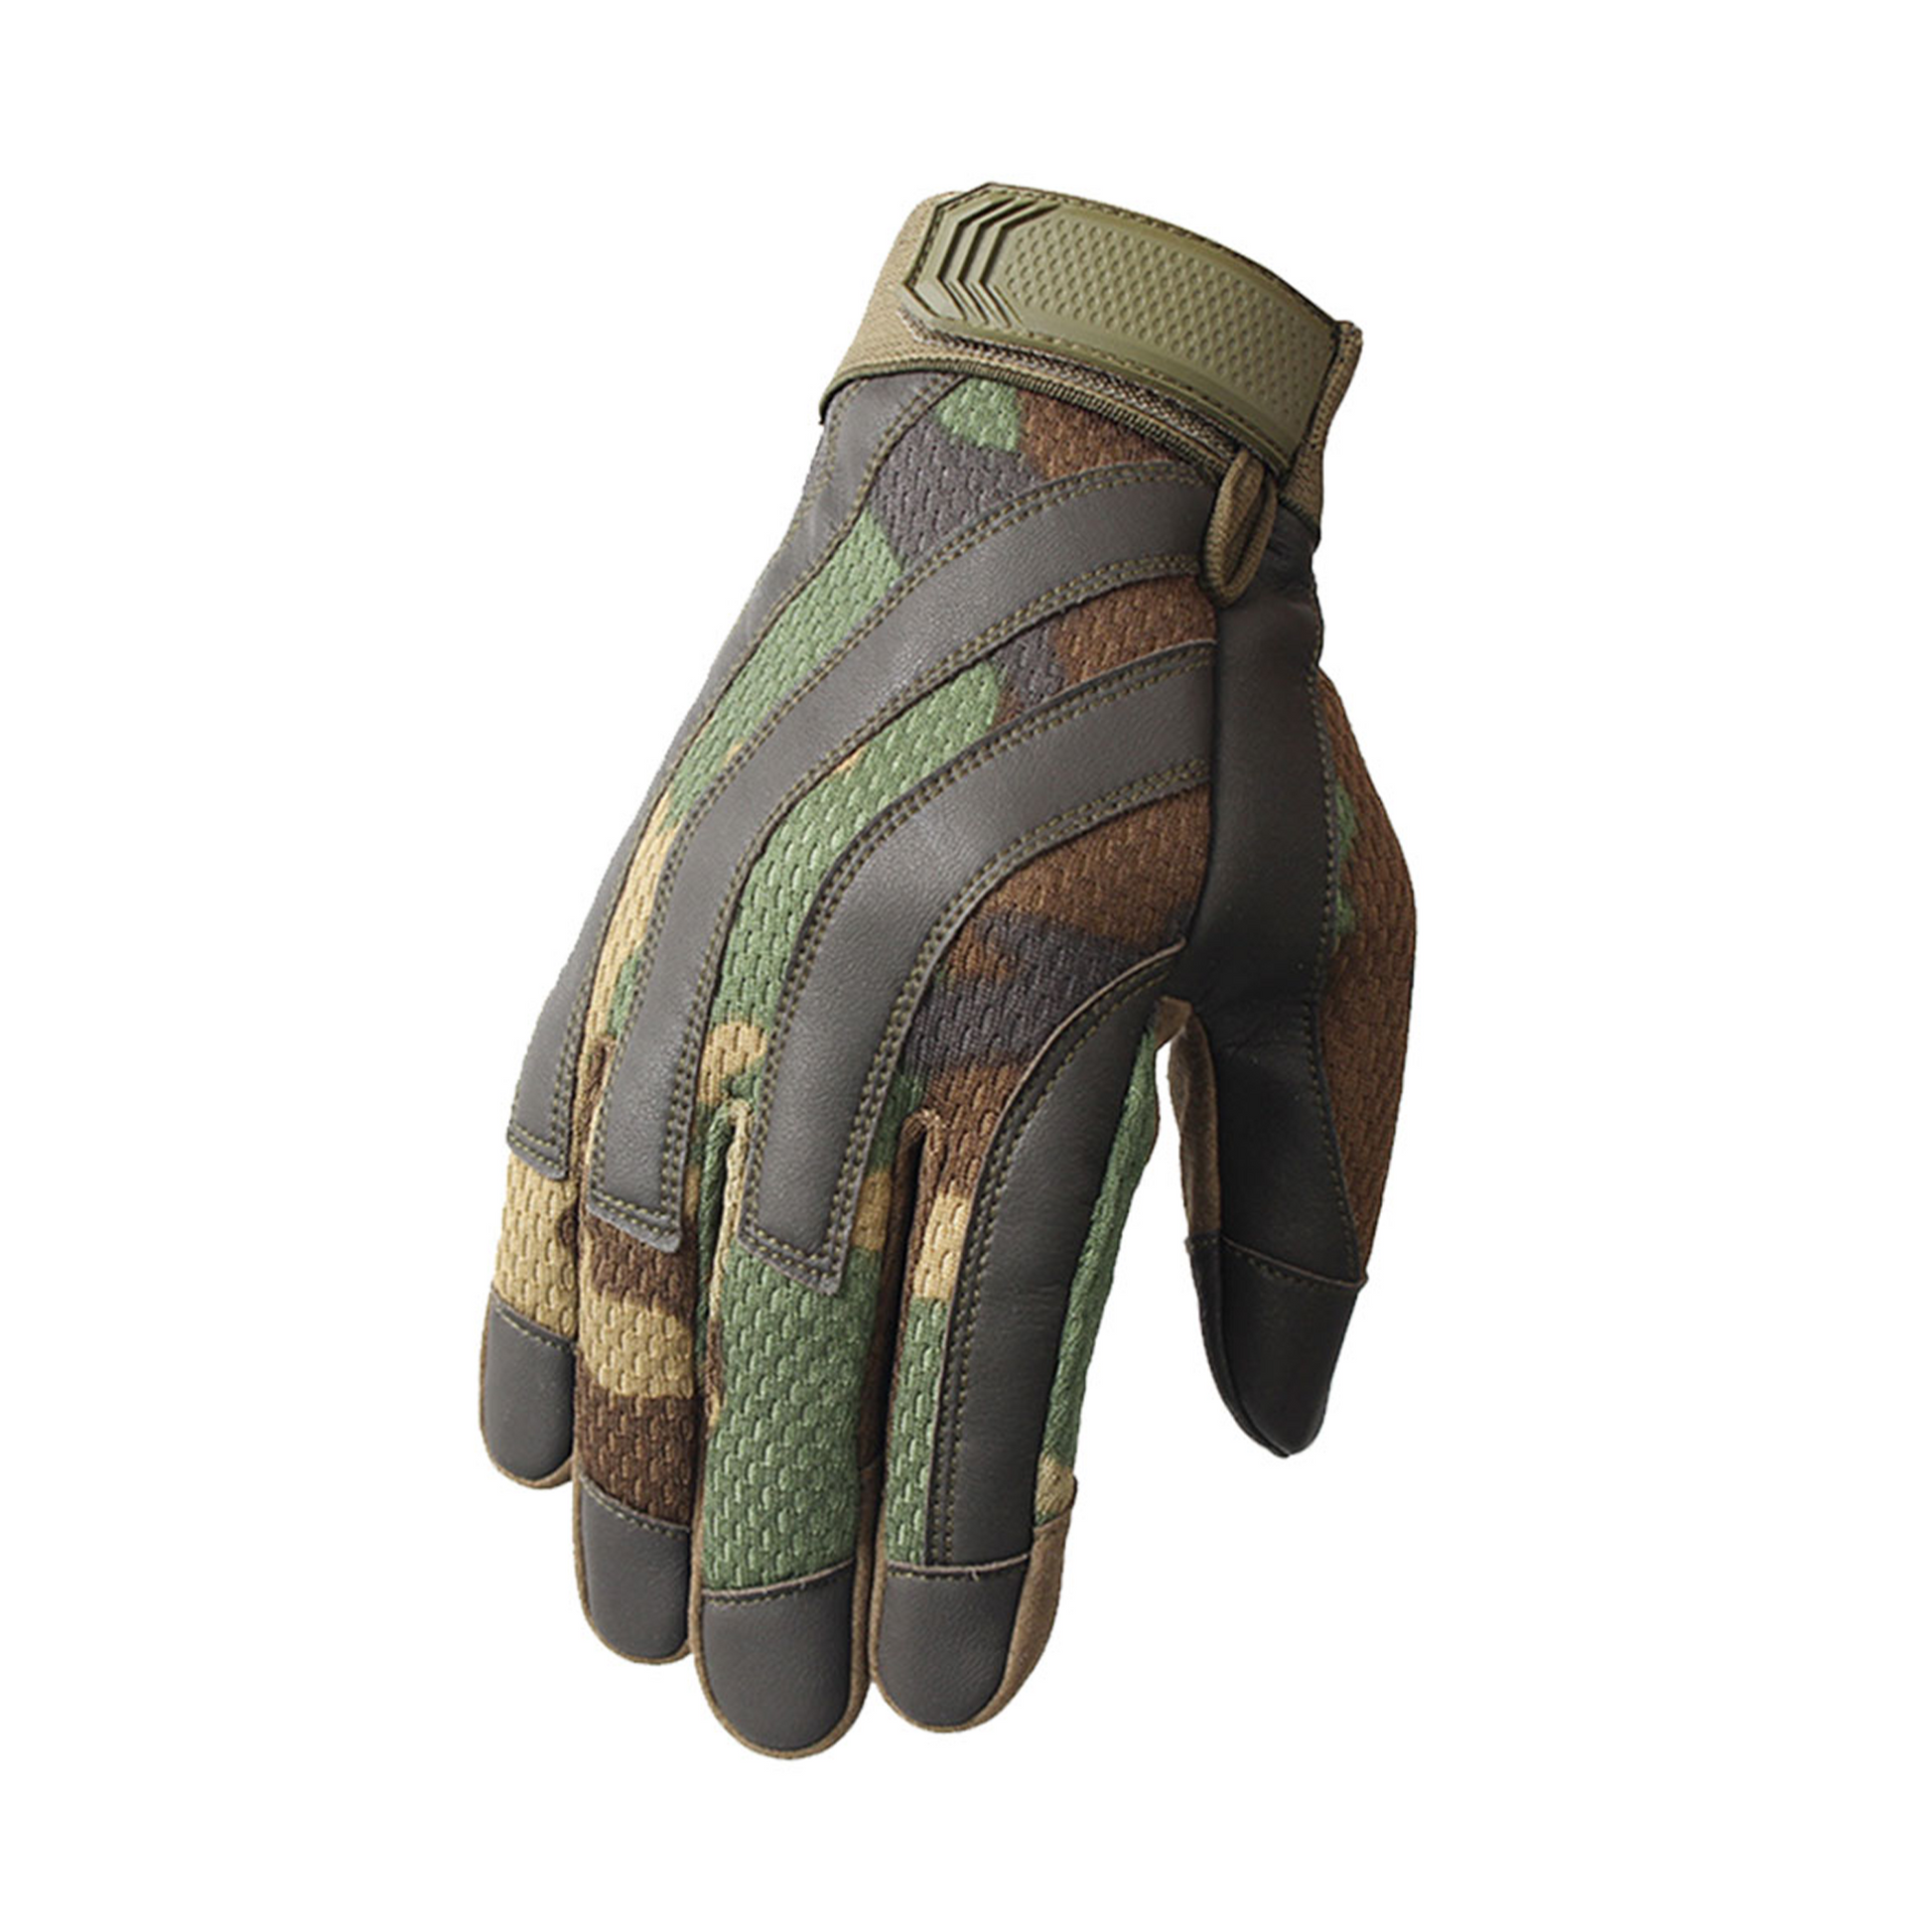 IJ Tactical All Purpose Use Shooting Glove